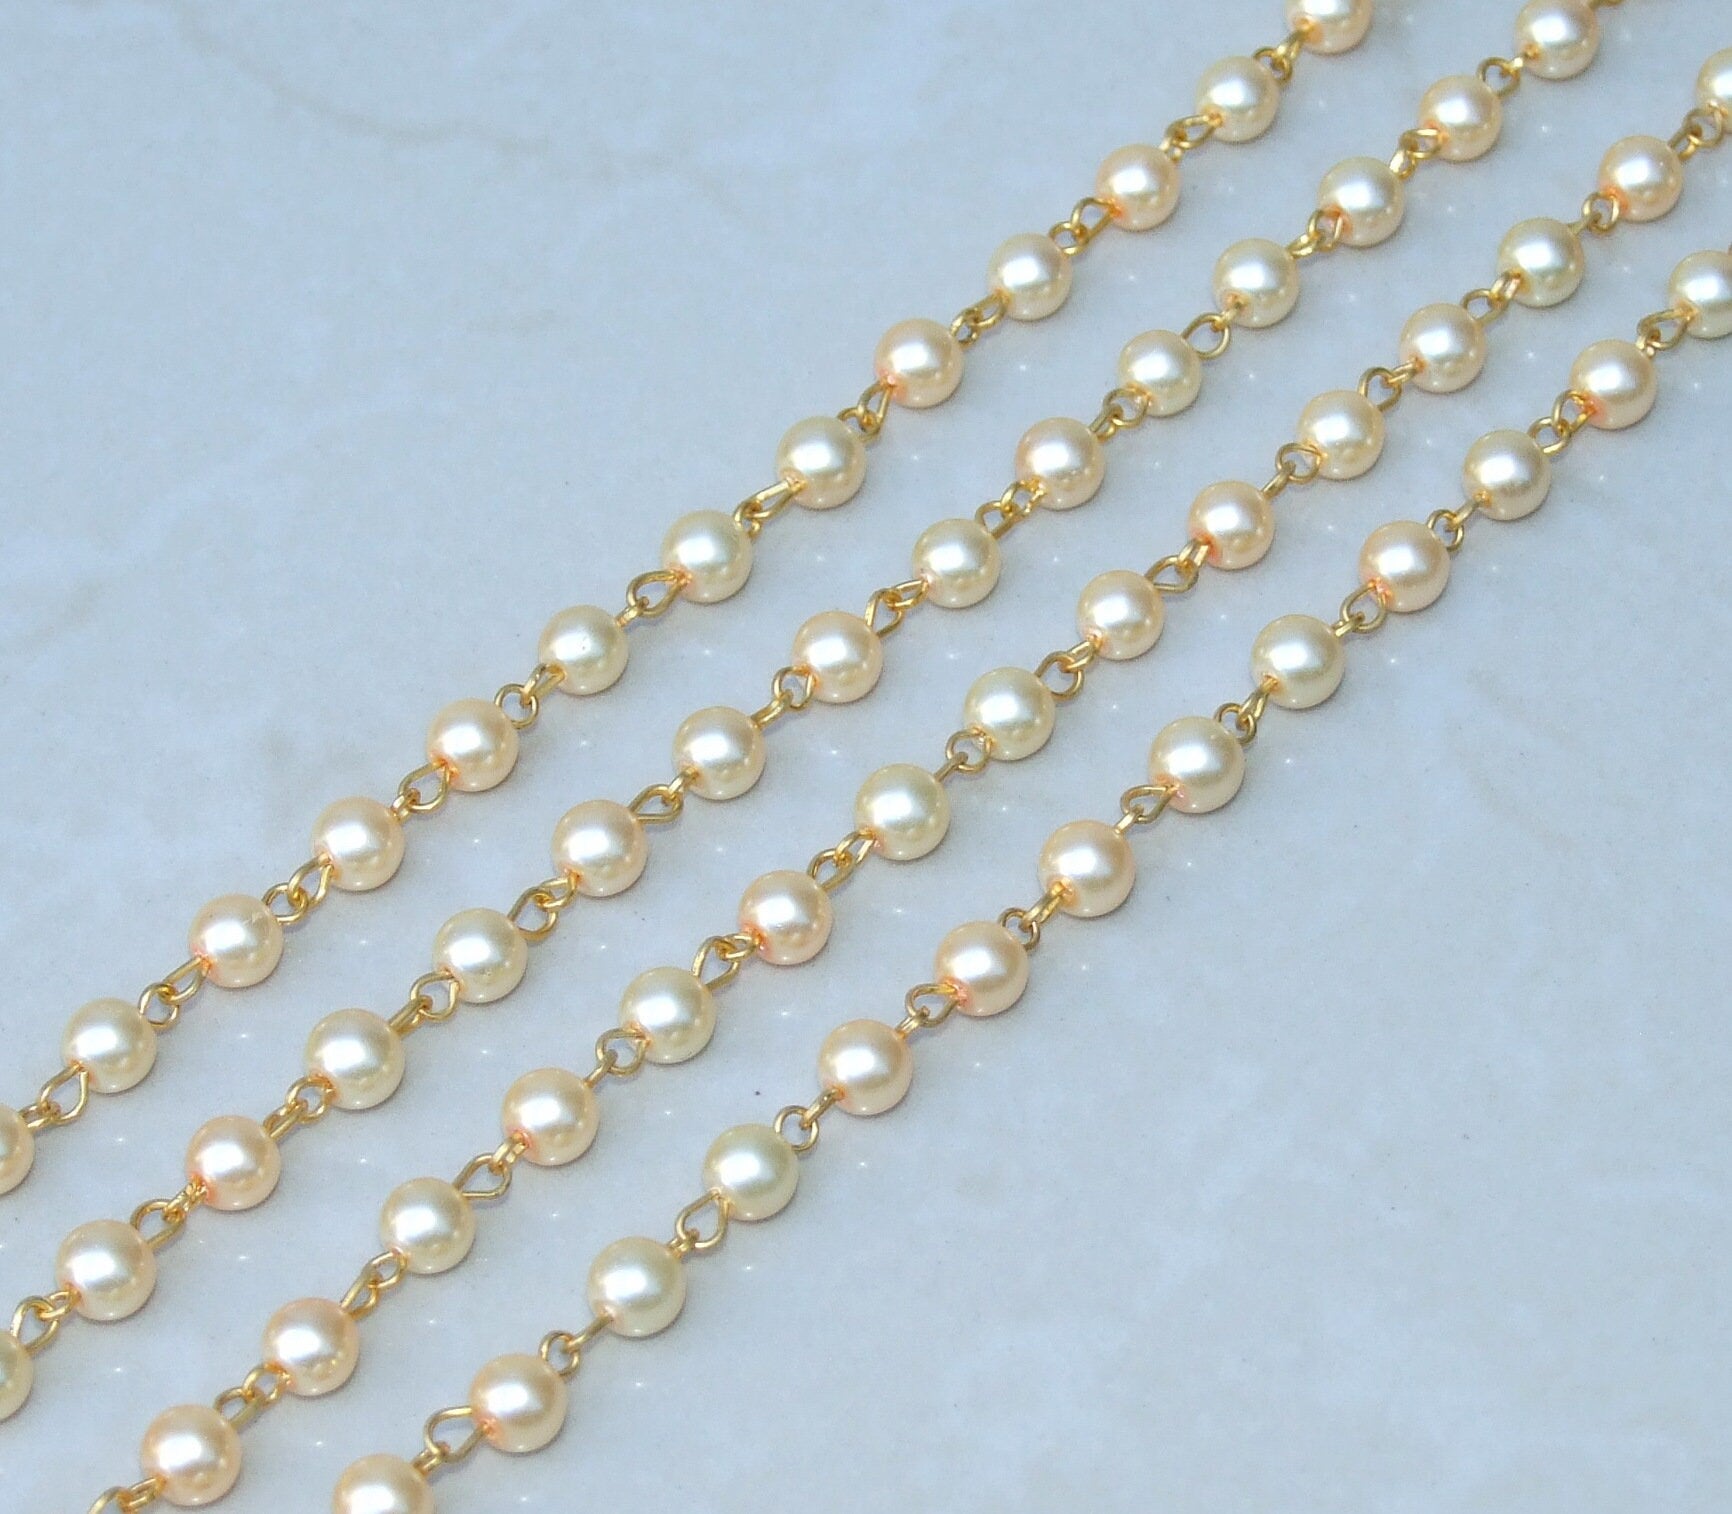 Gold Pearl Rosary Chain, 1 Meter, Bulk Chain, Round Glass Beads, Beaded Chain, Body Chain, Gold Chain, Necklace Chain, Belly Chain, 6mm